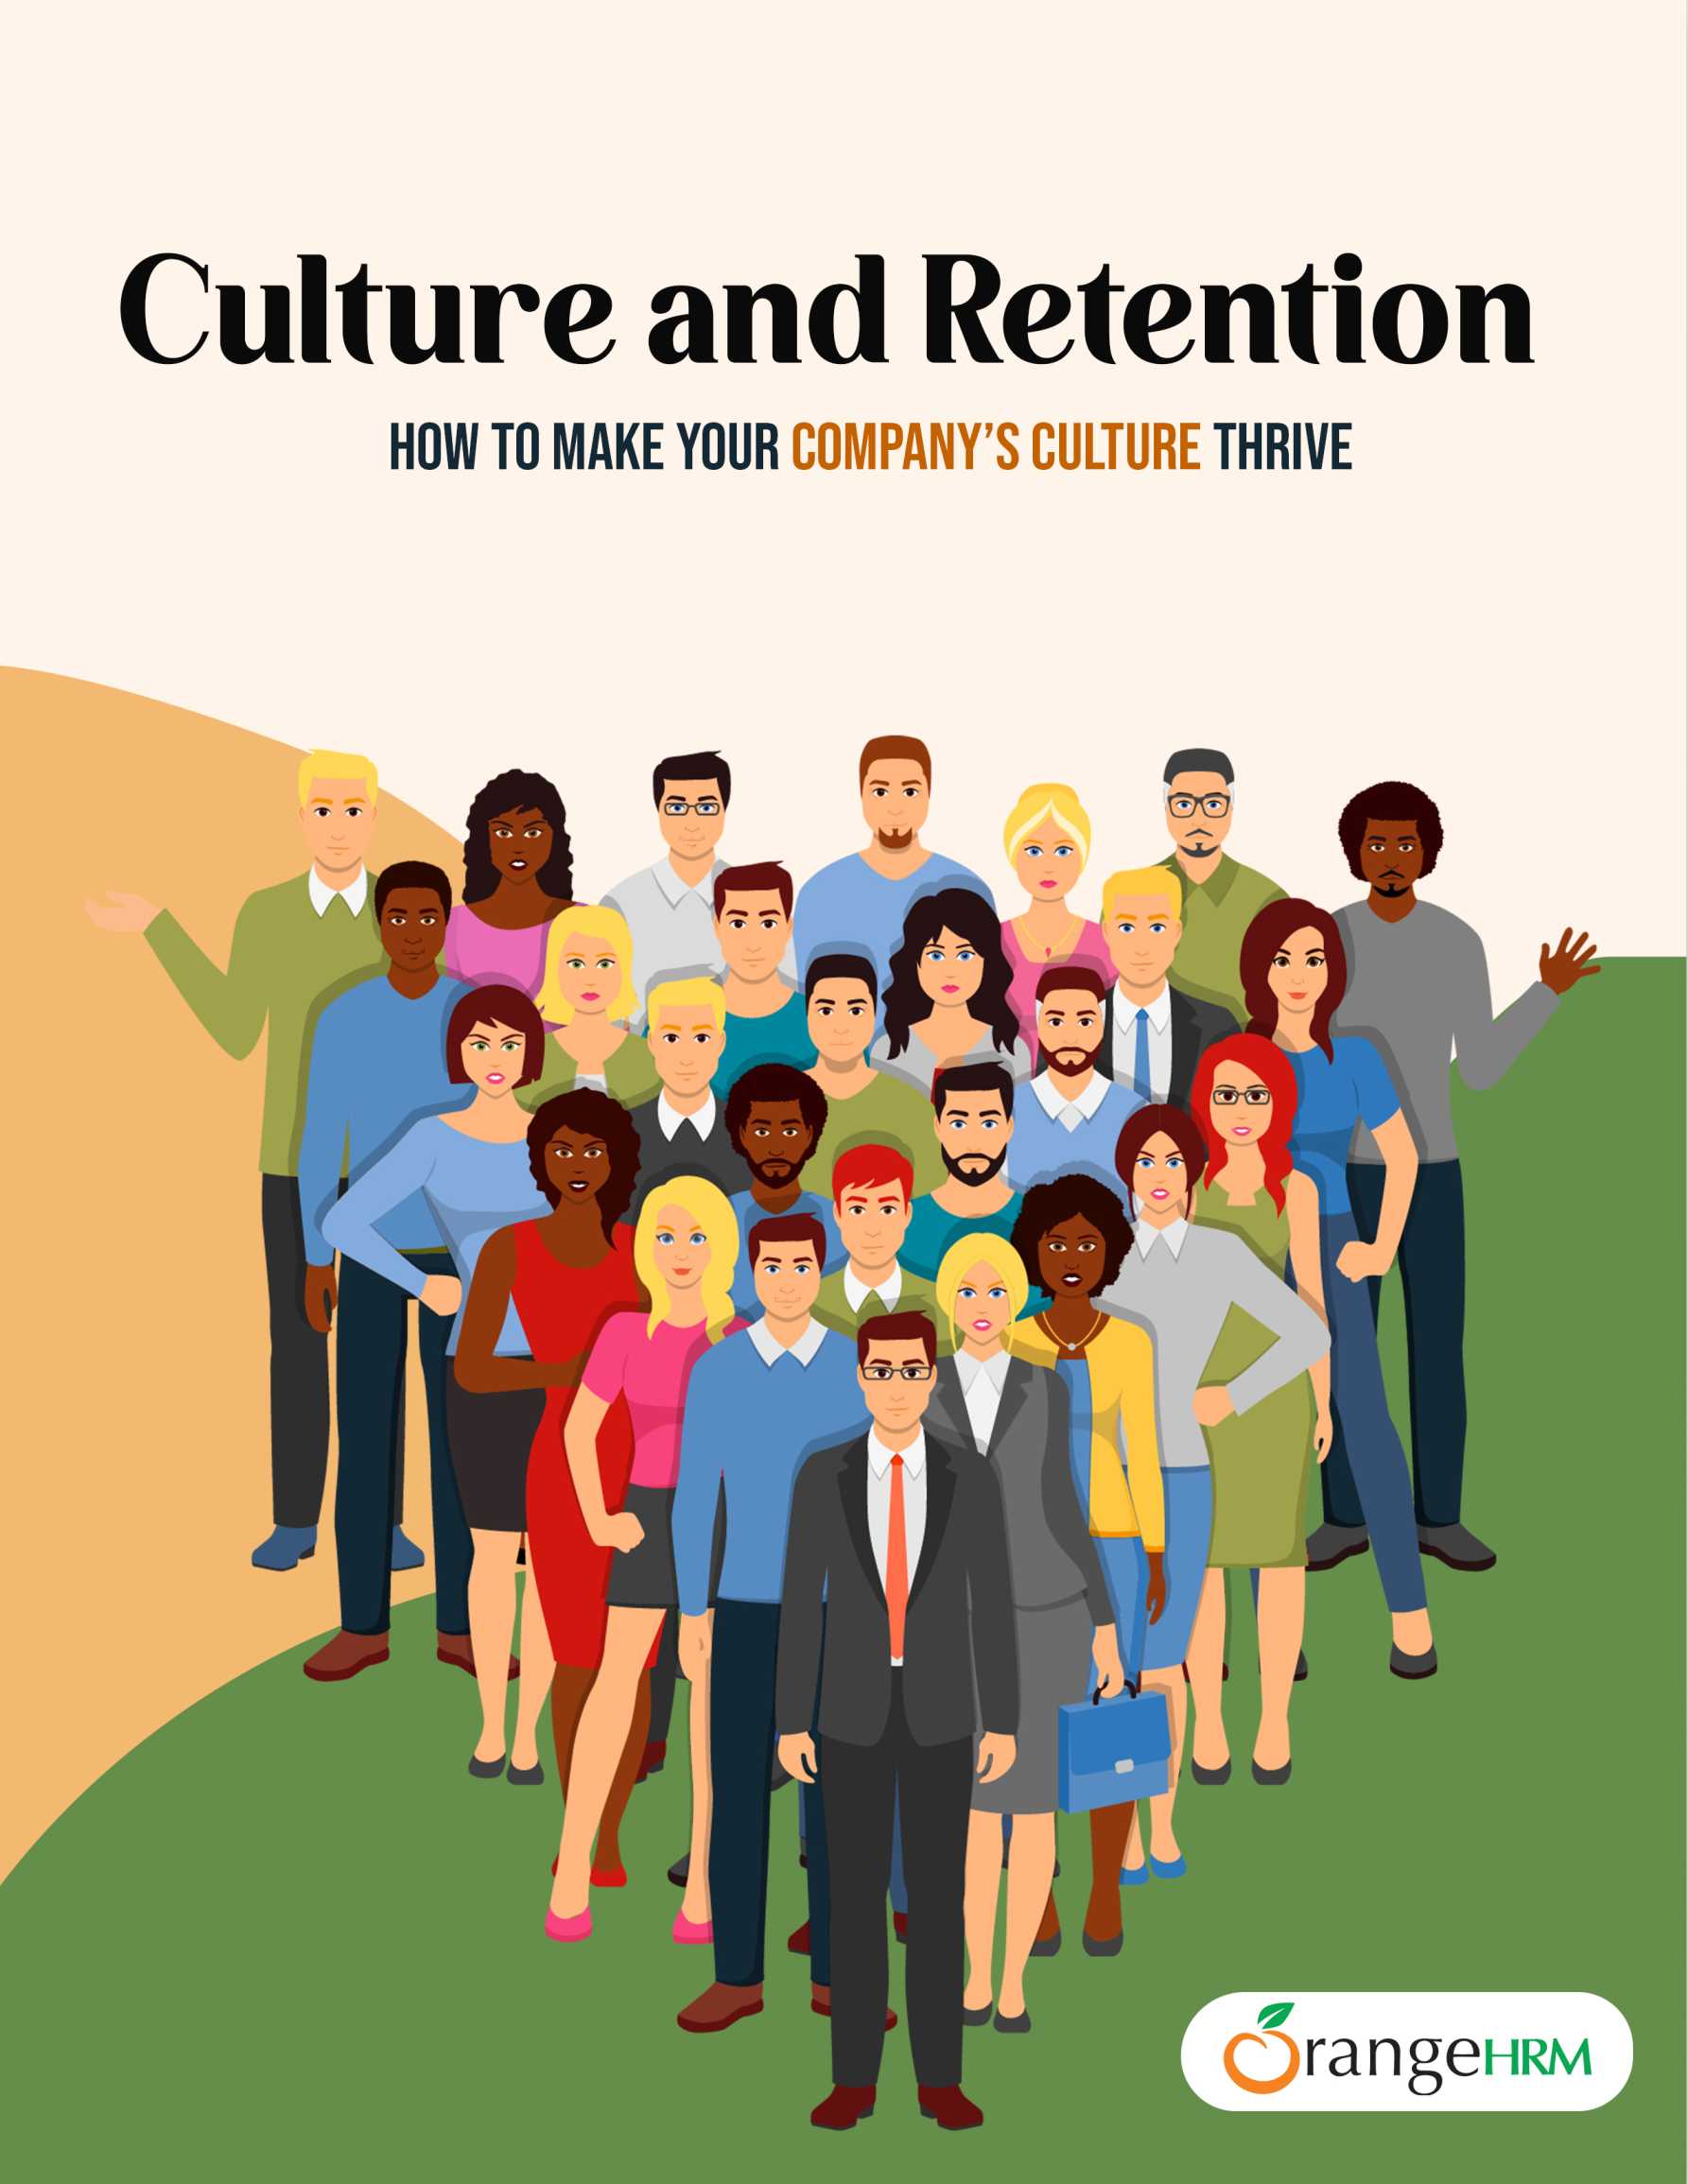 Culture and Retention